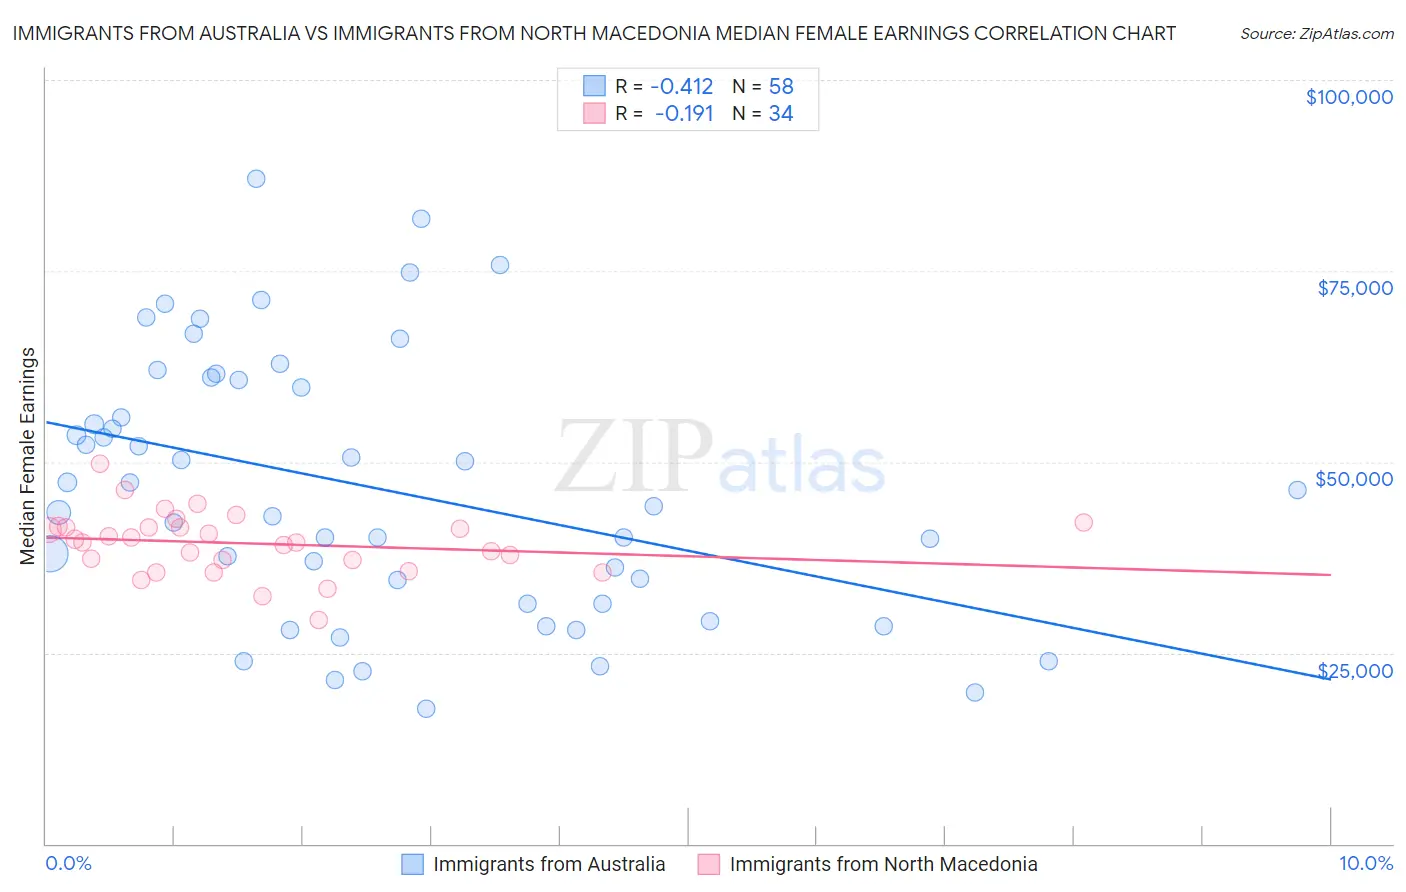 Immigrants from Australia vs Immigrants from North Macedonia Median Female Earnings